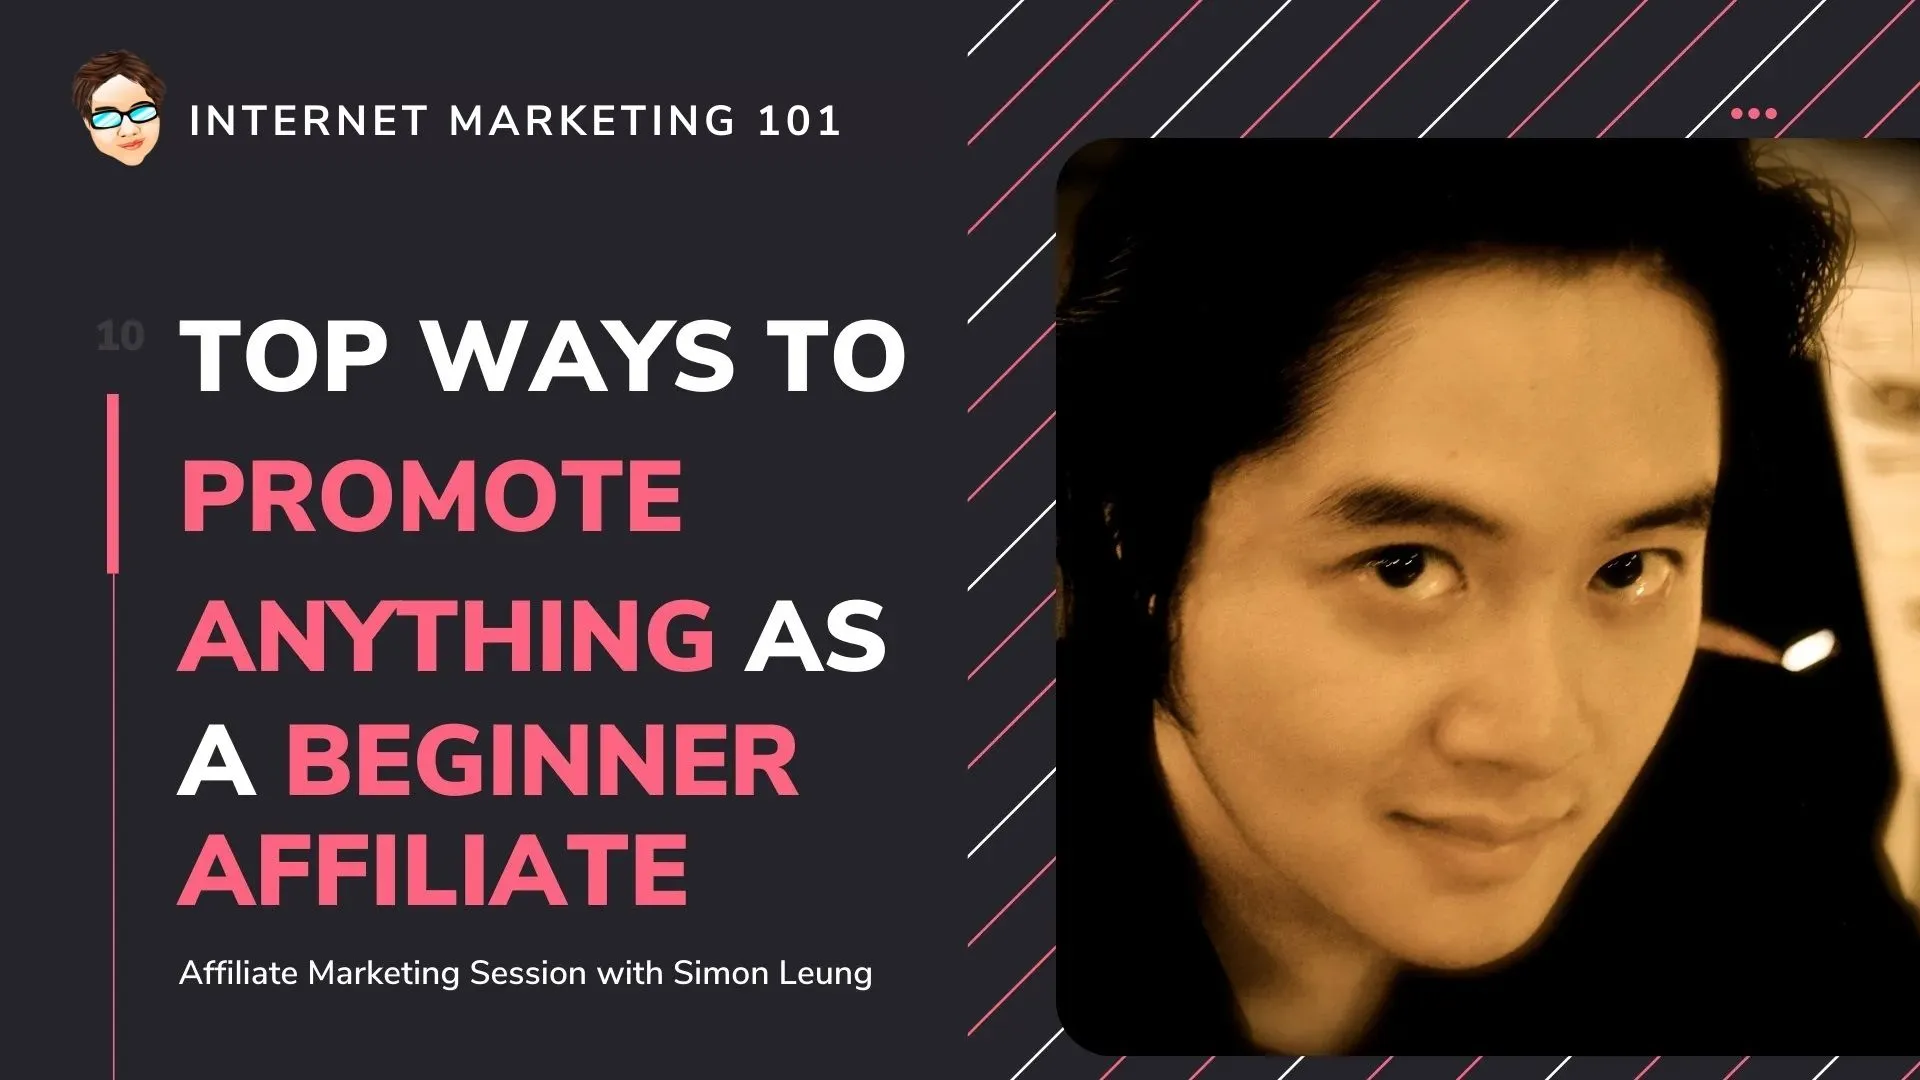 Internet Marketing 101 - Top Ways To Promote Anything As A Beginner Affiliate (Simon Leung)